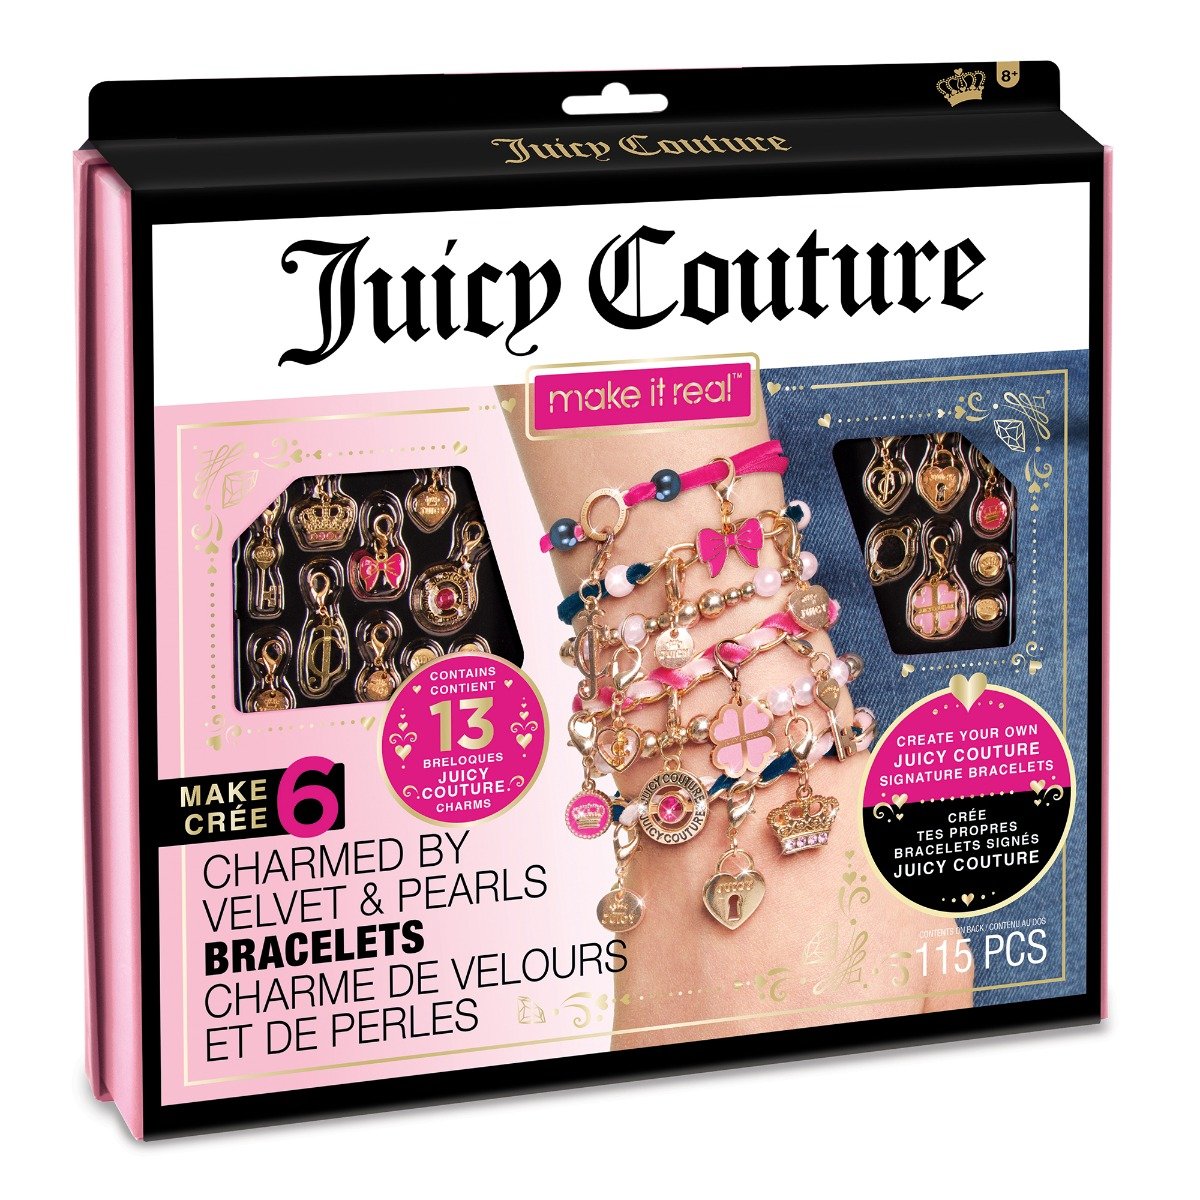 Poze Set de bratari si bijuterii Juicy Couture Charmed By Velvet and Pearls, Make It Real